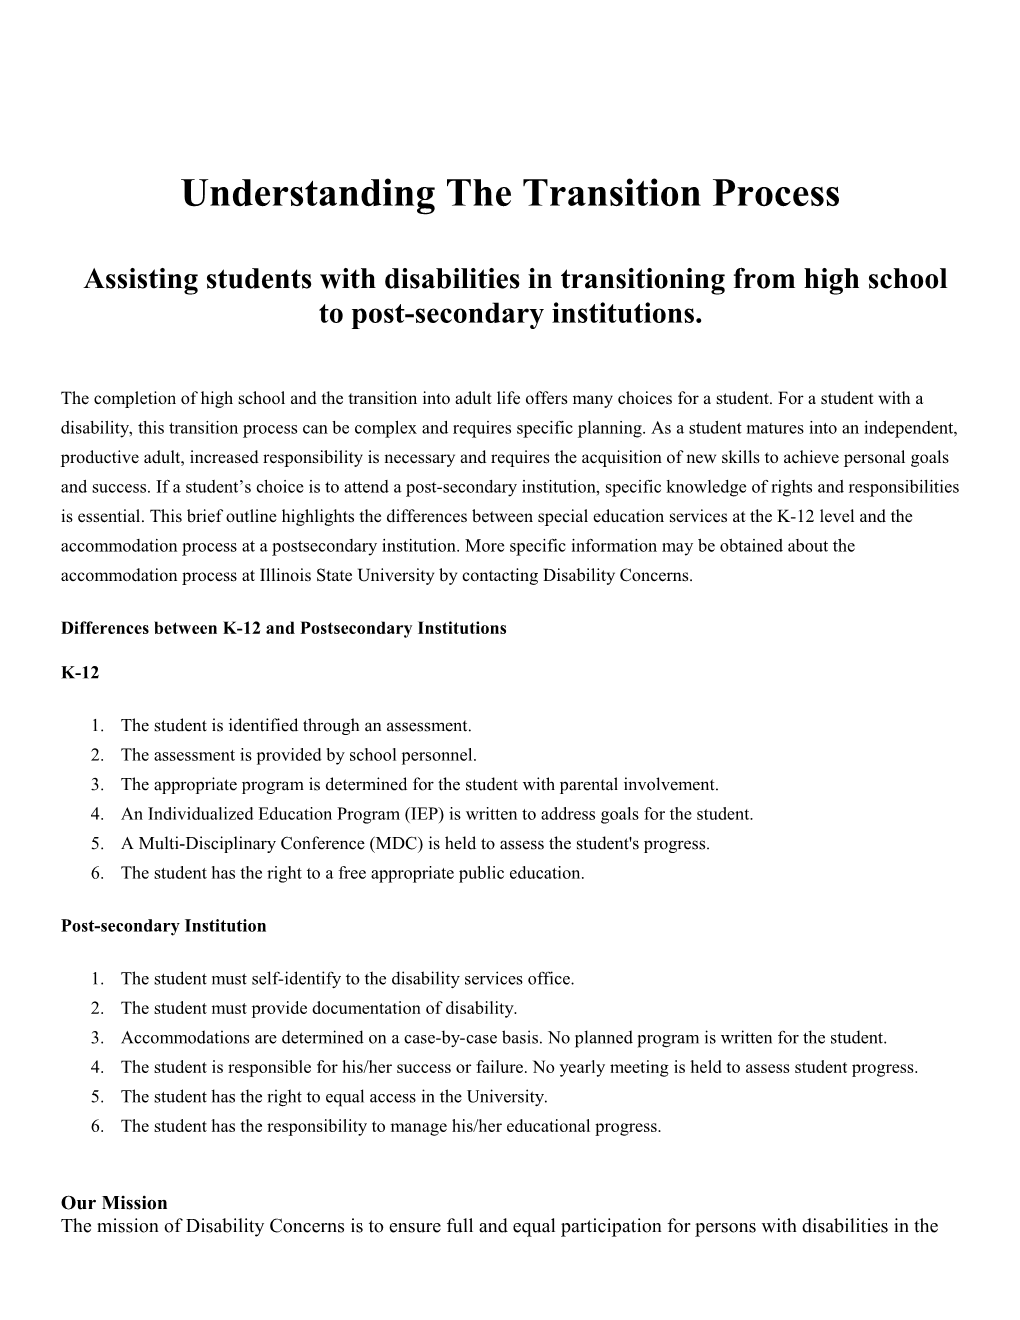 Understanding the Transition Process